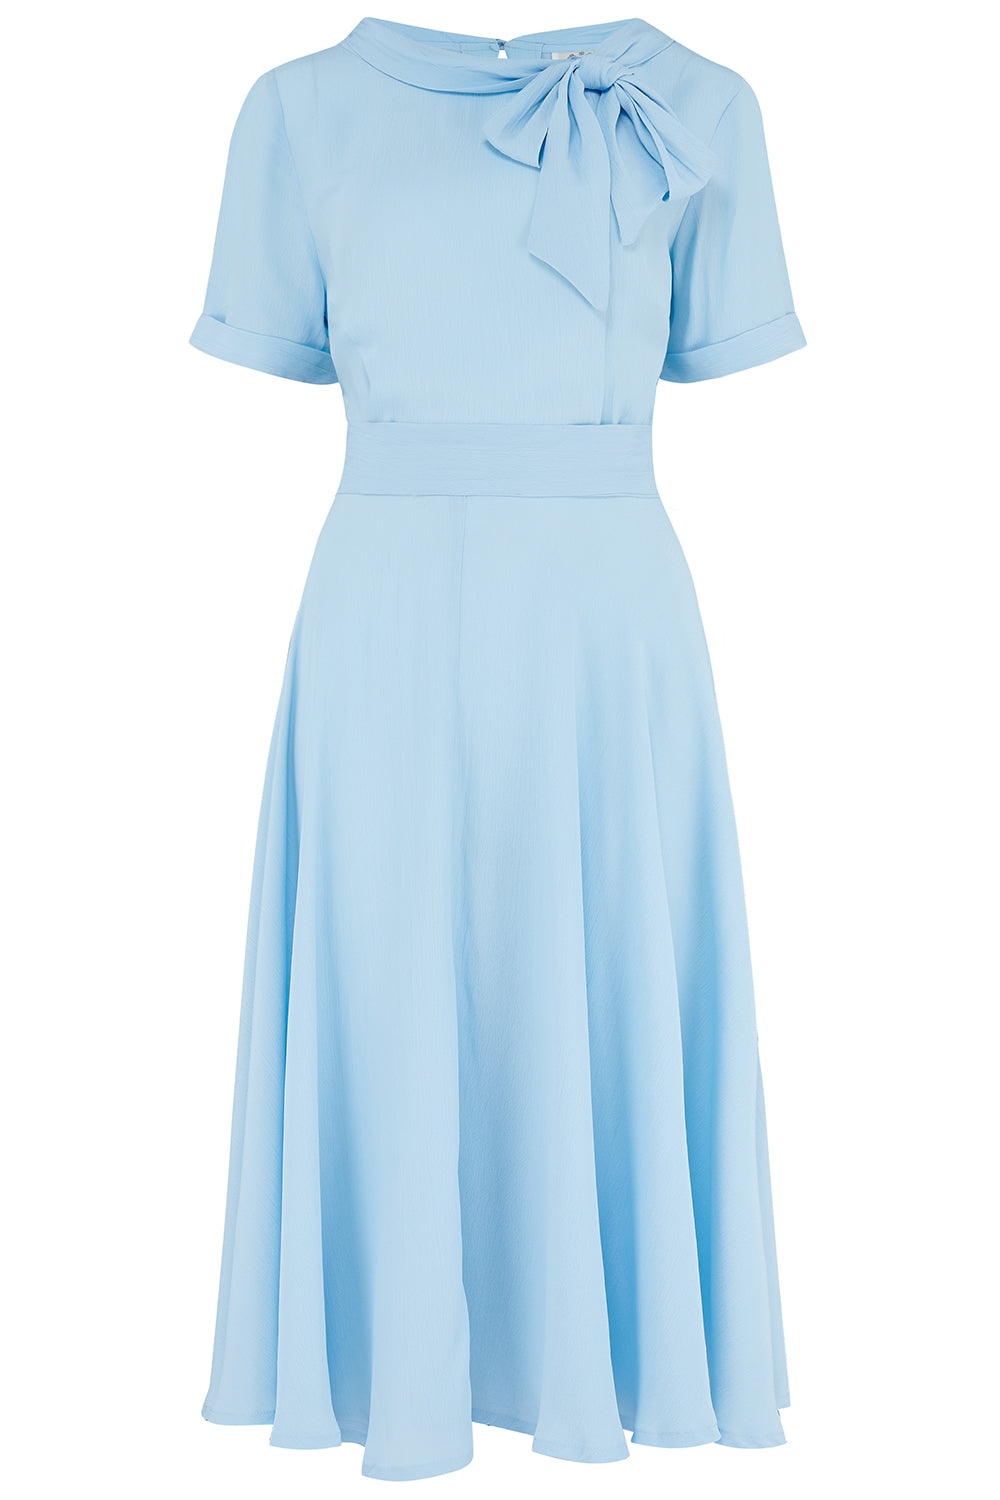 Cindy Dress in Powder Blue by The Seamstress Of Bloomsbury, Classic 1940s Vintage Inspired Style - True and authentic vintage style clothing, inspired by the Classic styles of CC41 , WW2 and the fun 1950s RocknRoll era, for everyday wear plus events like Goodwood Revival, Twinwood Festival and Viva Las Vegas Rockabilly Weekend Rock n Romance The Seamstress Of Bloomsbury